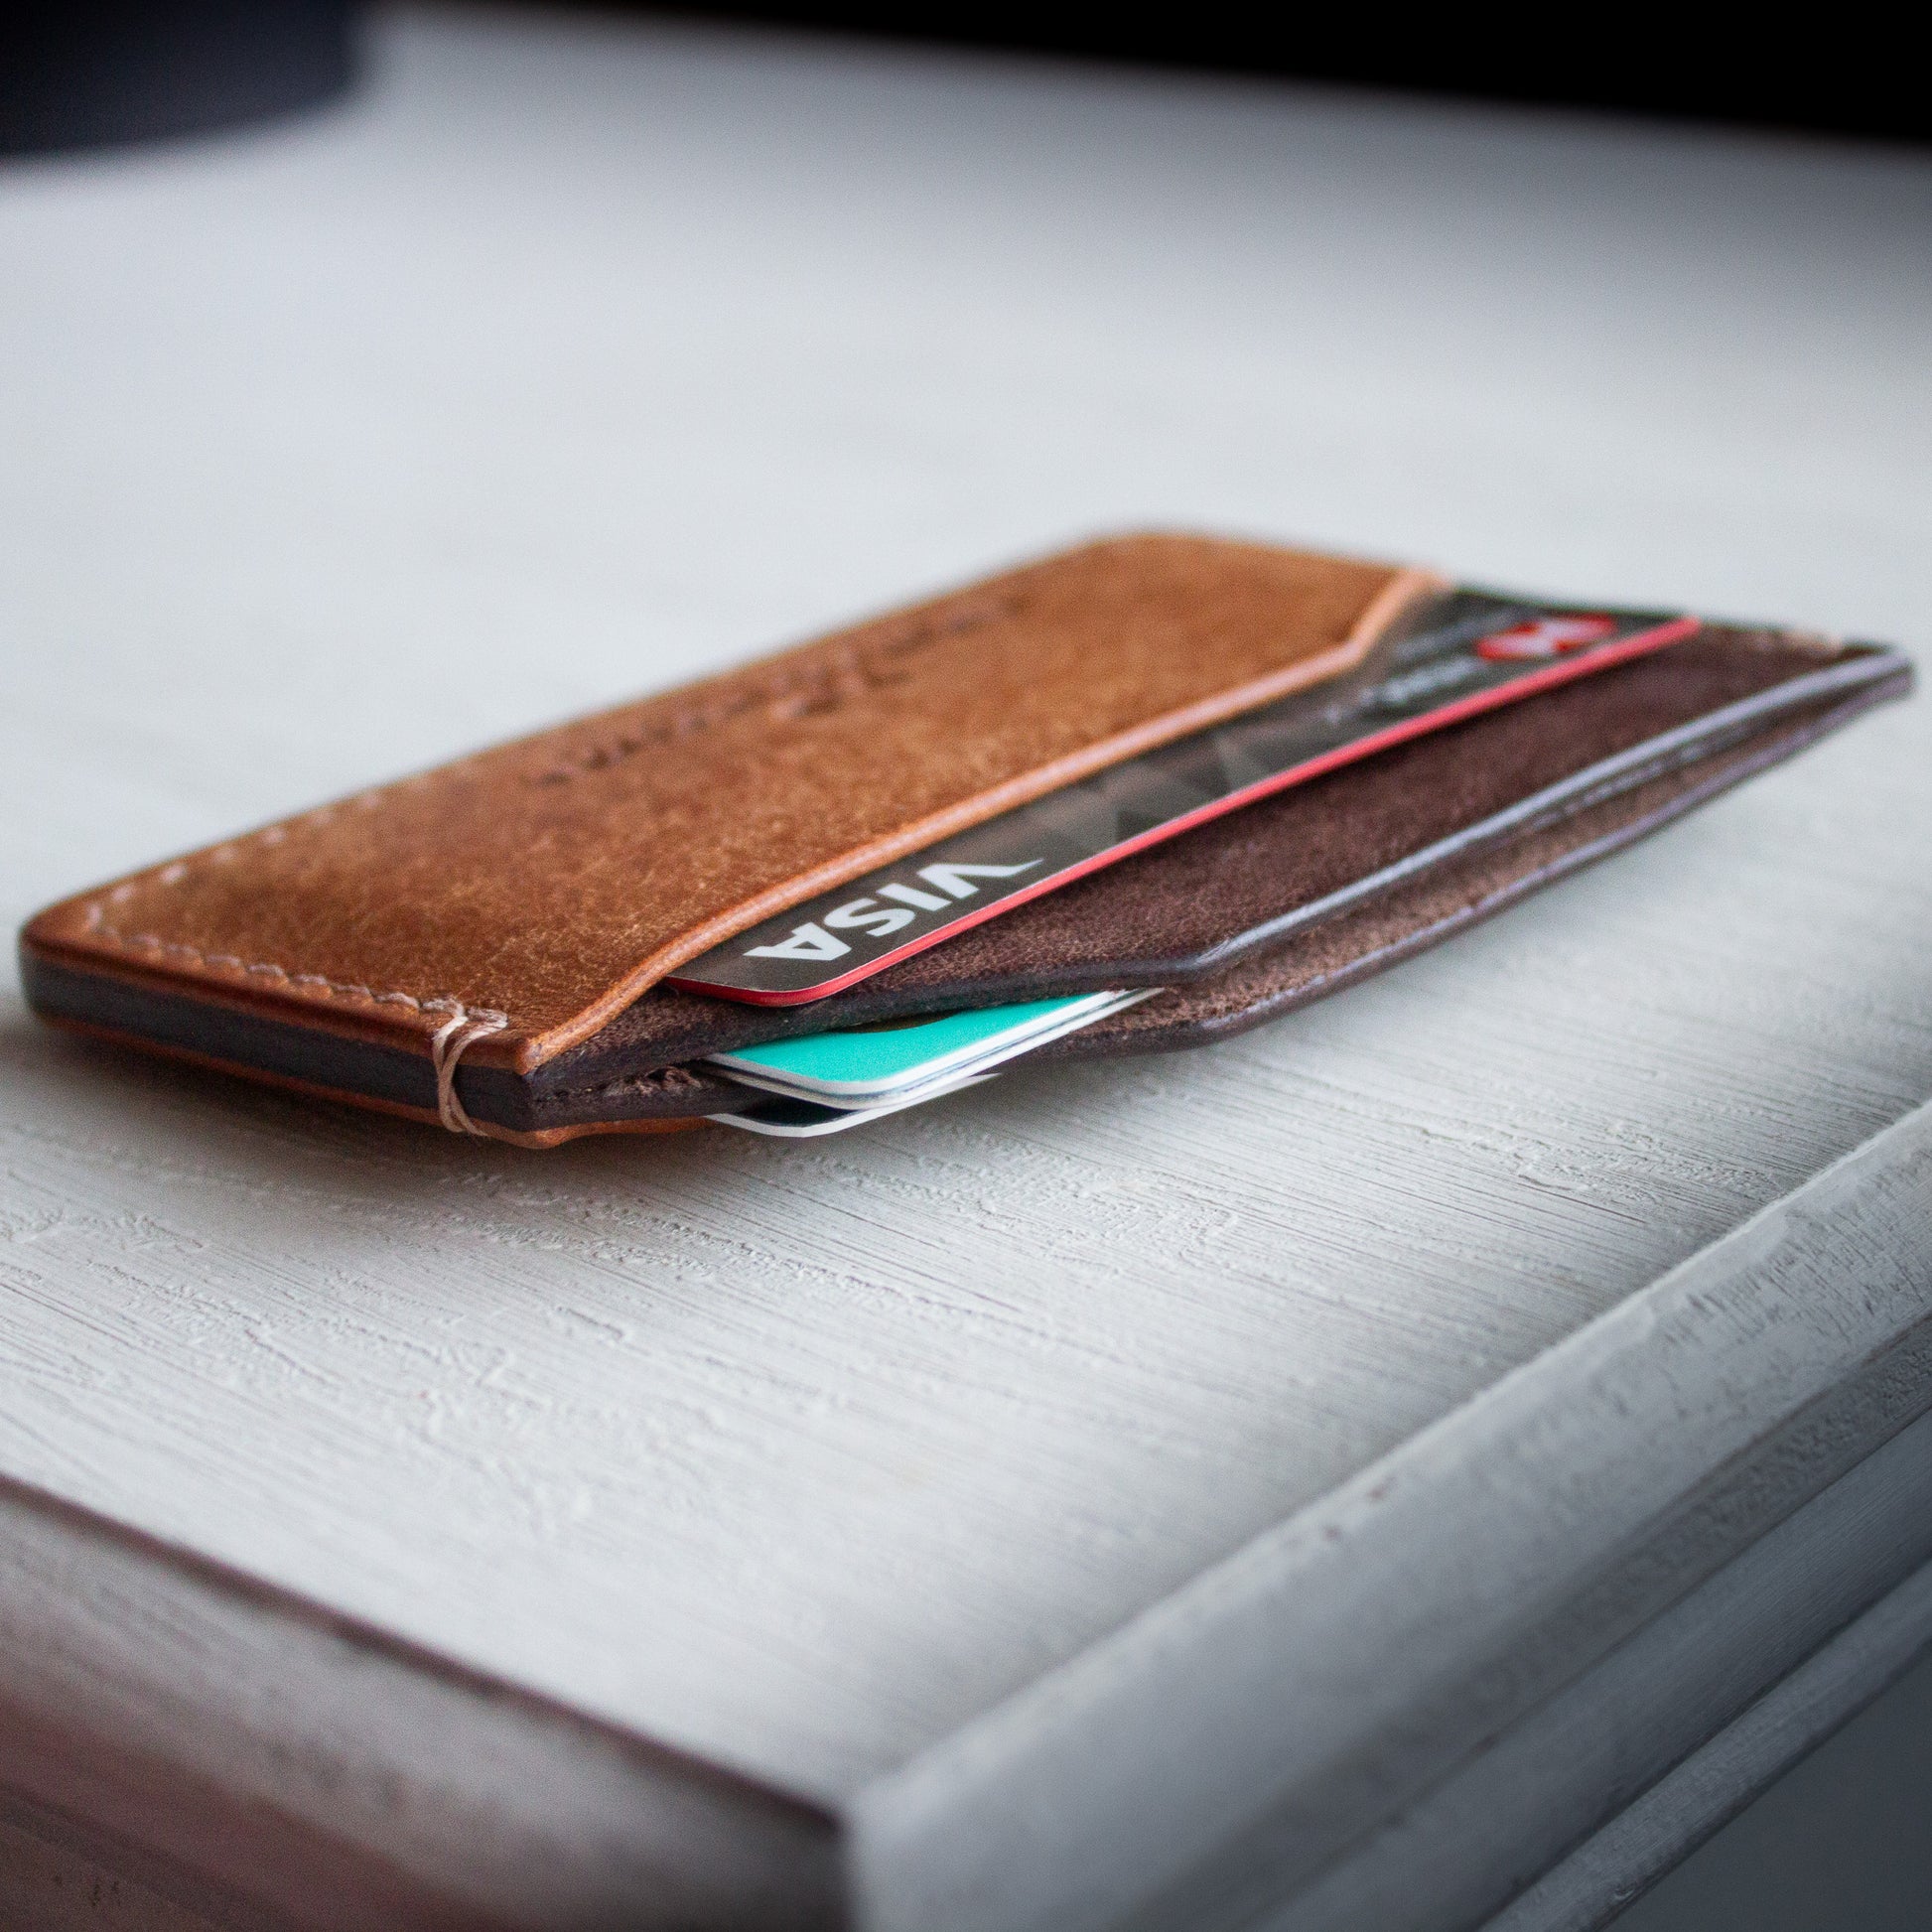 Elkwood Leather - The Aspen - minimalist full grain Italian Pueblo leather cardholder wallet on white wooden table next to galaxy pen and knife and keys close up of credit cards